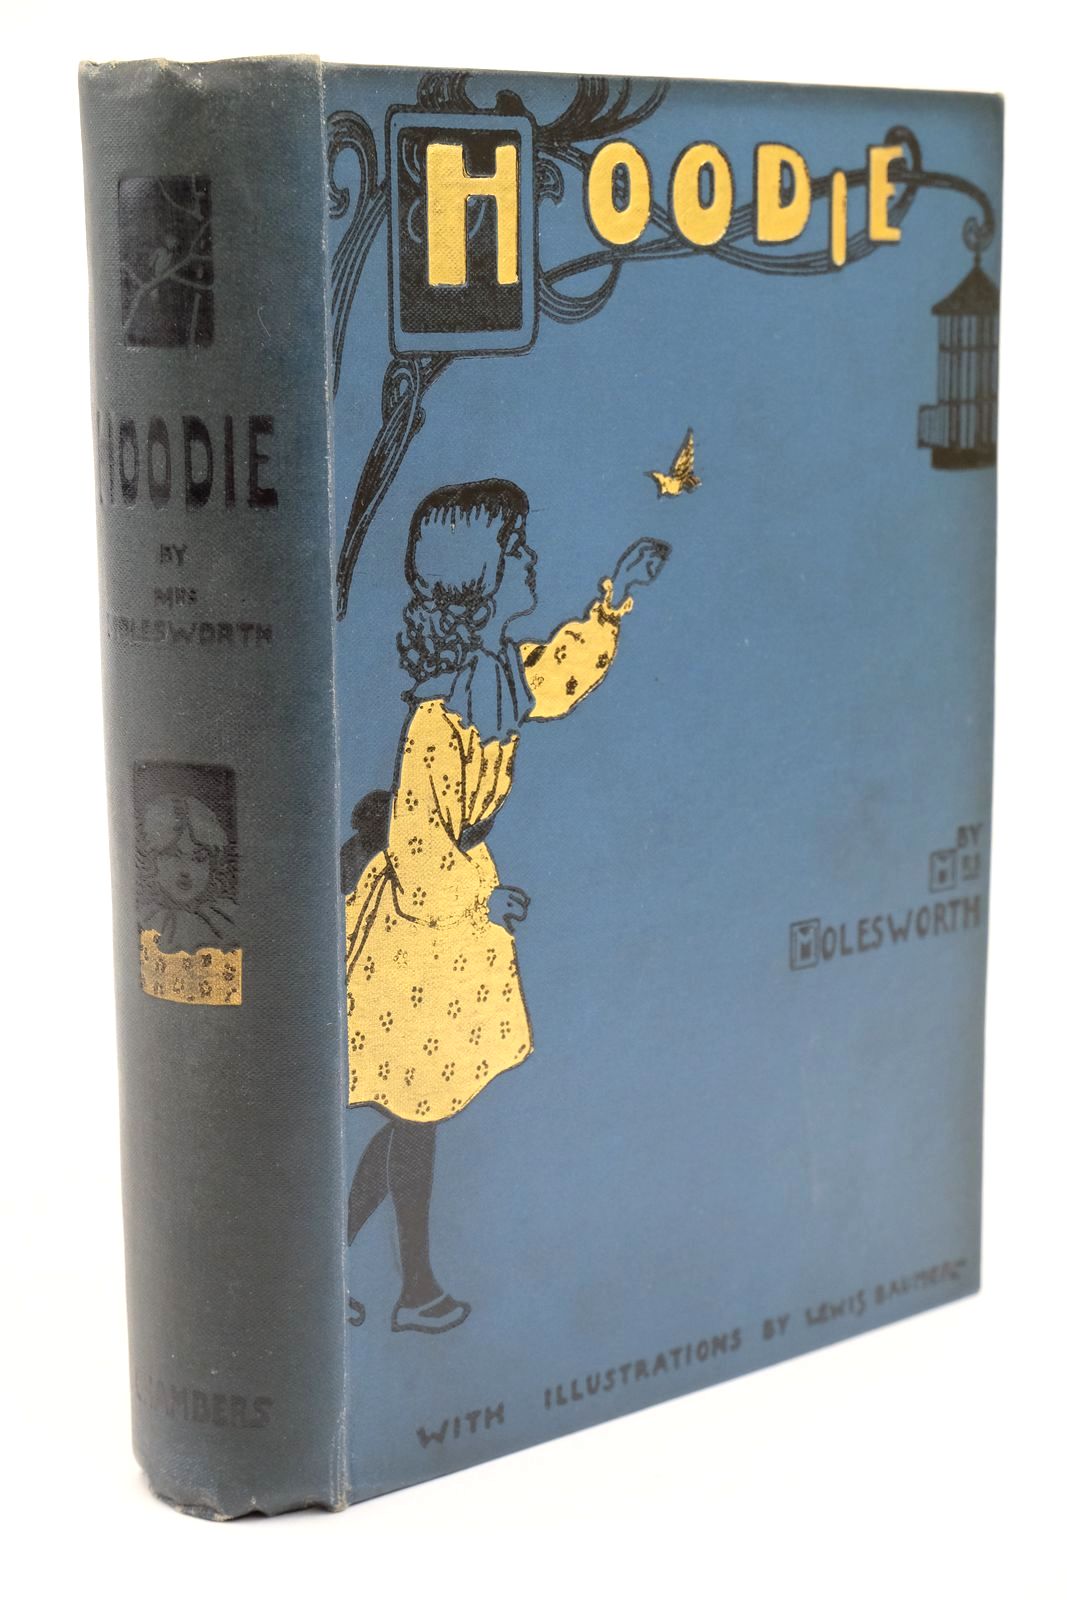 Photo of HOODIE written by Molesworth, Mrs. illustrated by Baumer, Lewis published by W. &amp; R. Chambers Limited (STOCK CODE: 1322898)  for sale by Stella & Rose's Books